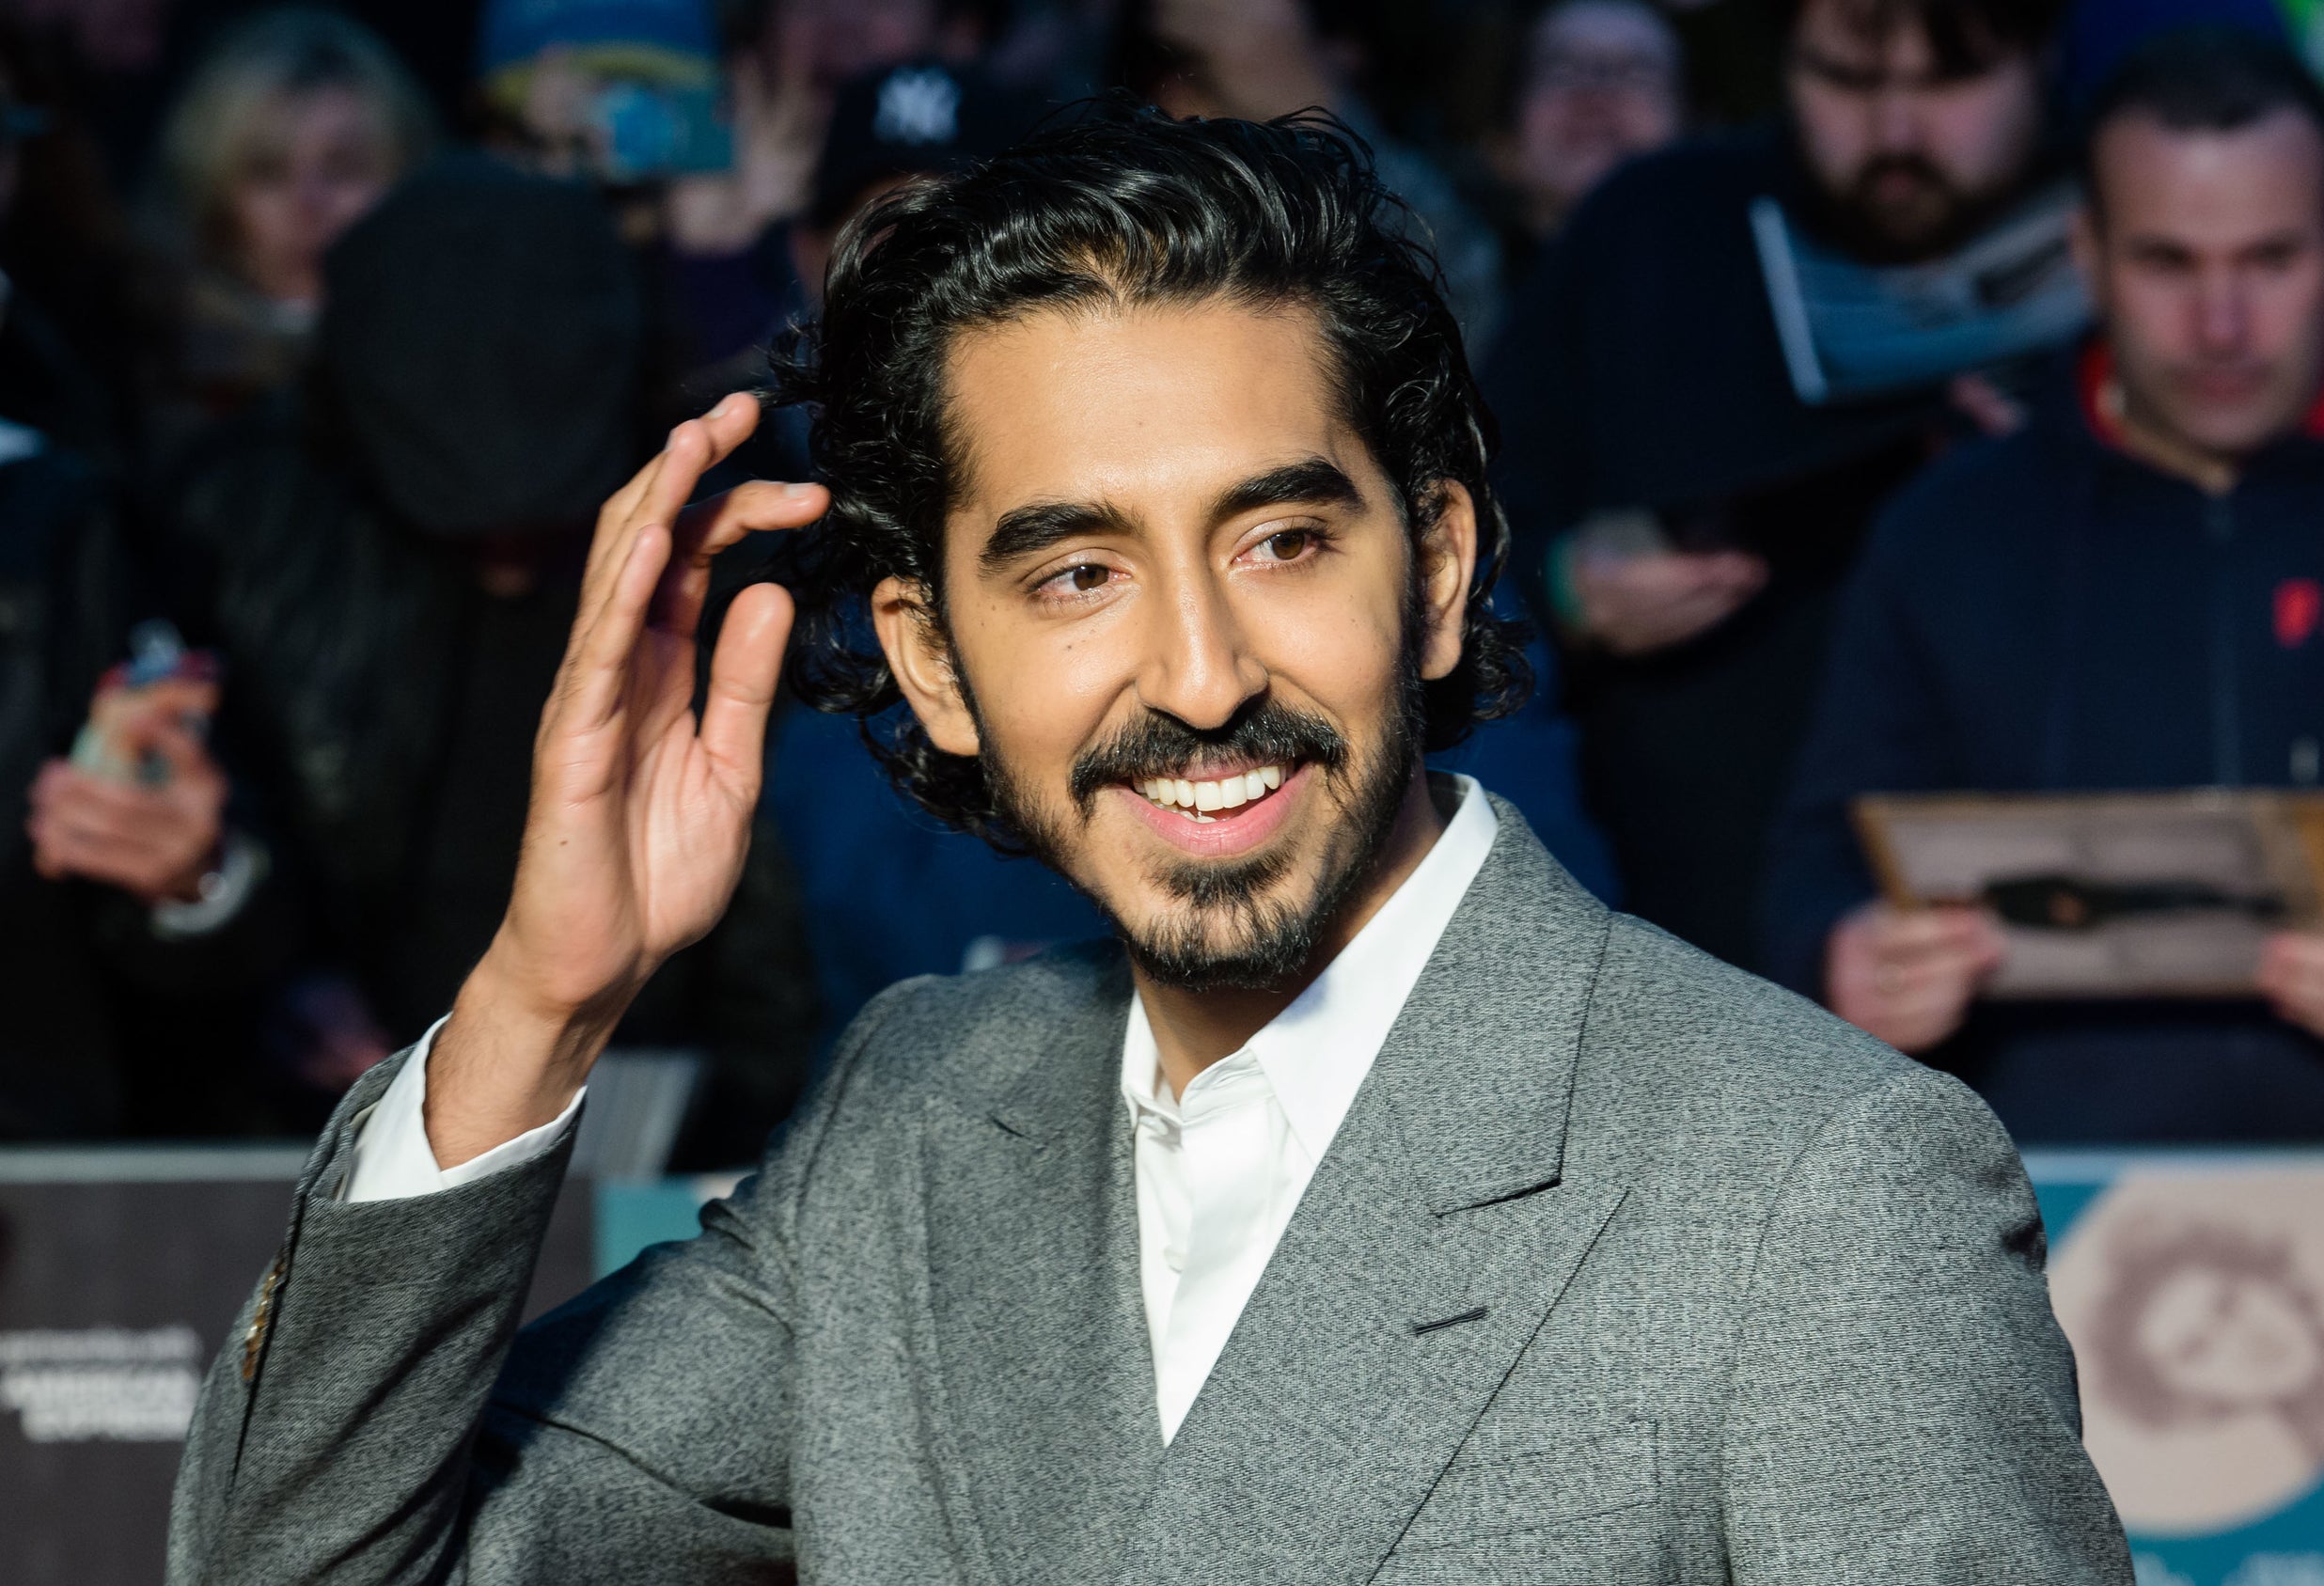 Photo of Dev Patel in a gray suit smiling at something off-camera